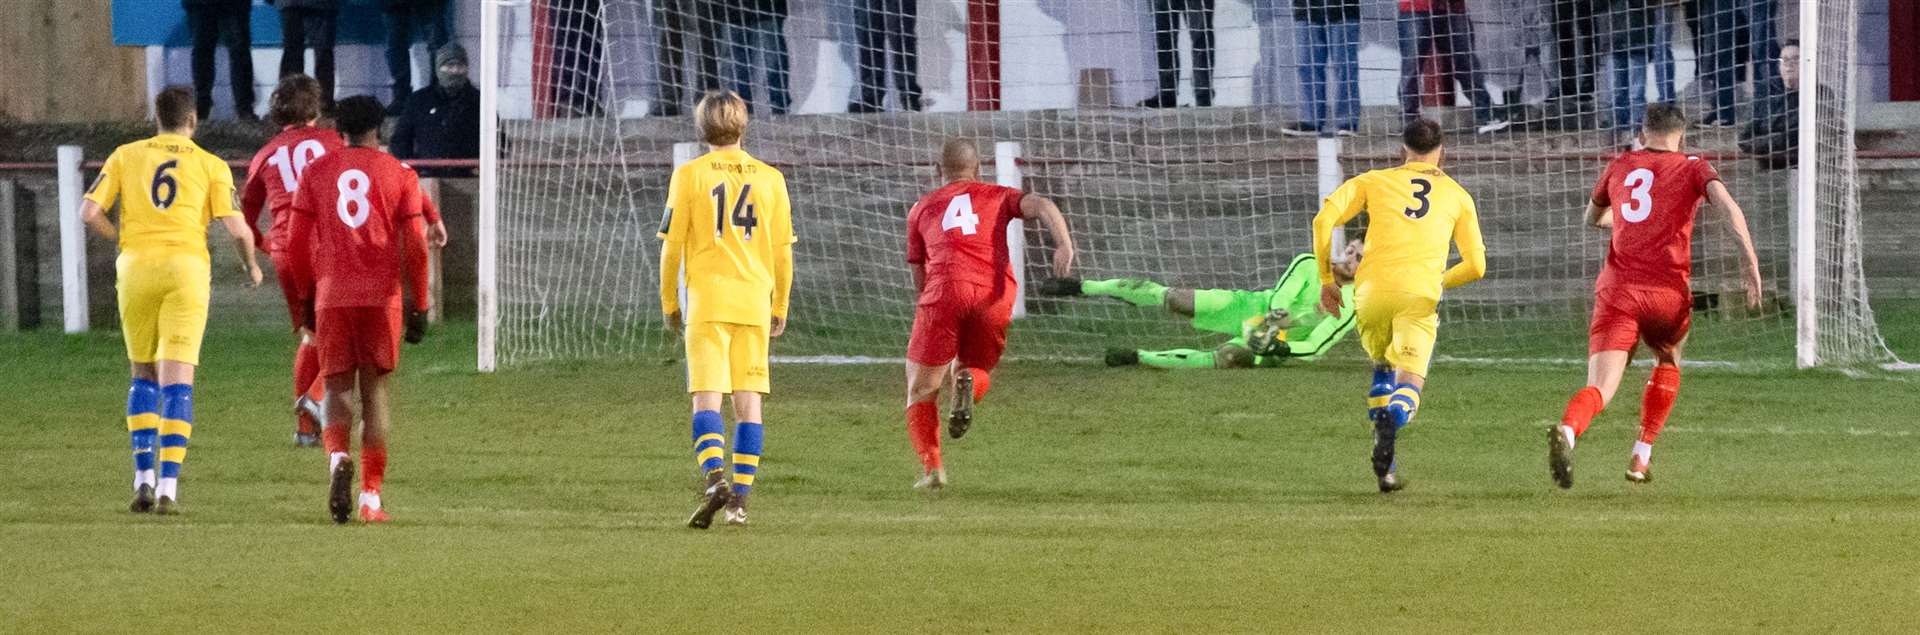 Dan Eason saves the first Ramsgate penalty Picture: Les Biggs